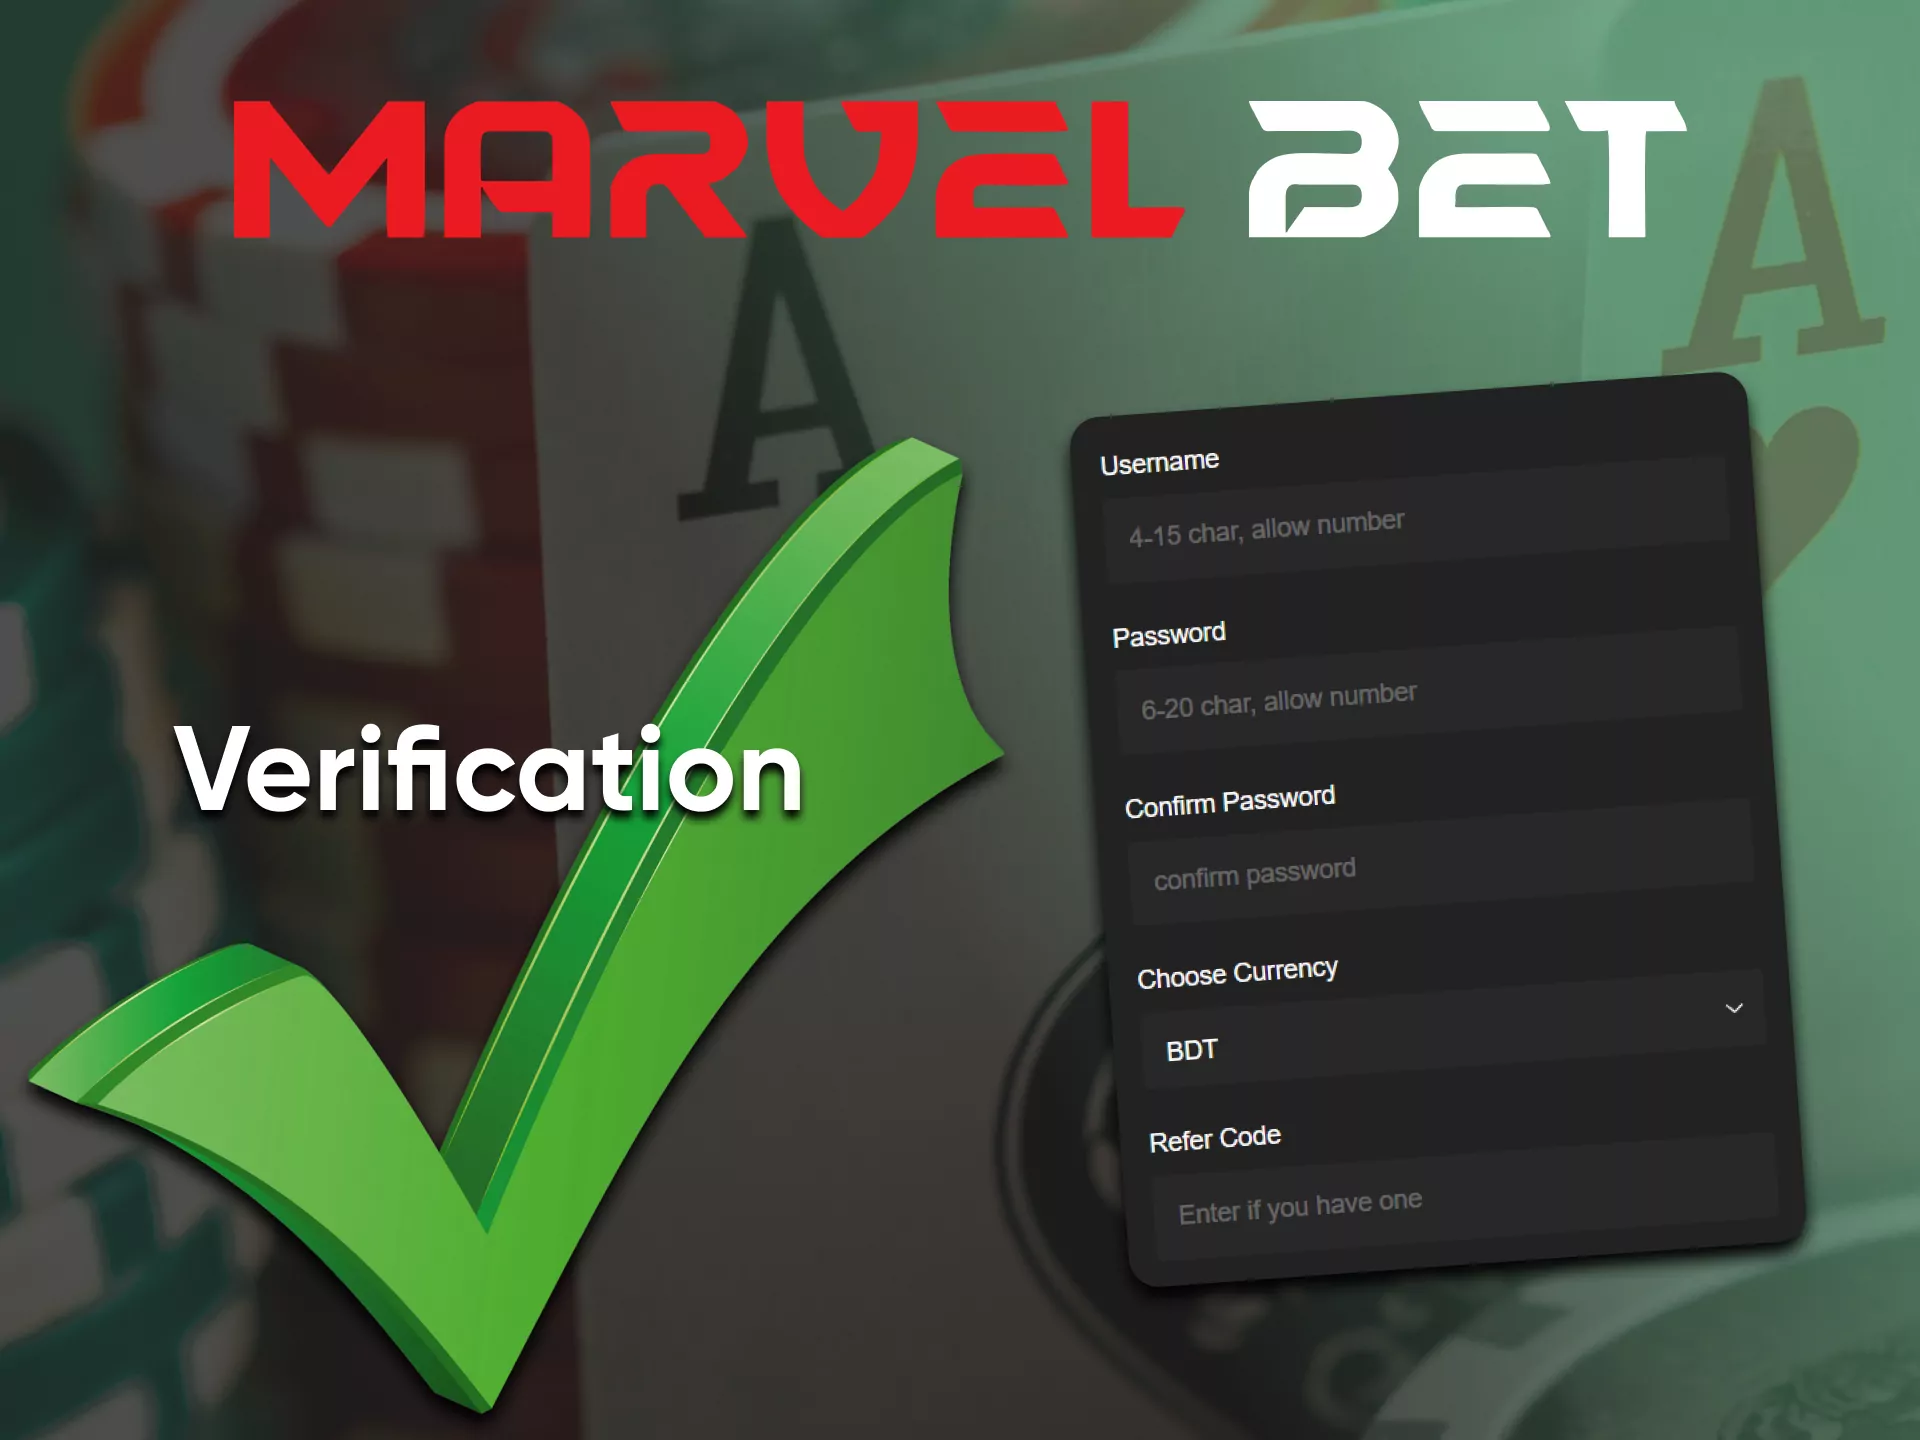 Enter your details for games at the casino from Marvelbet.